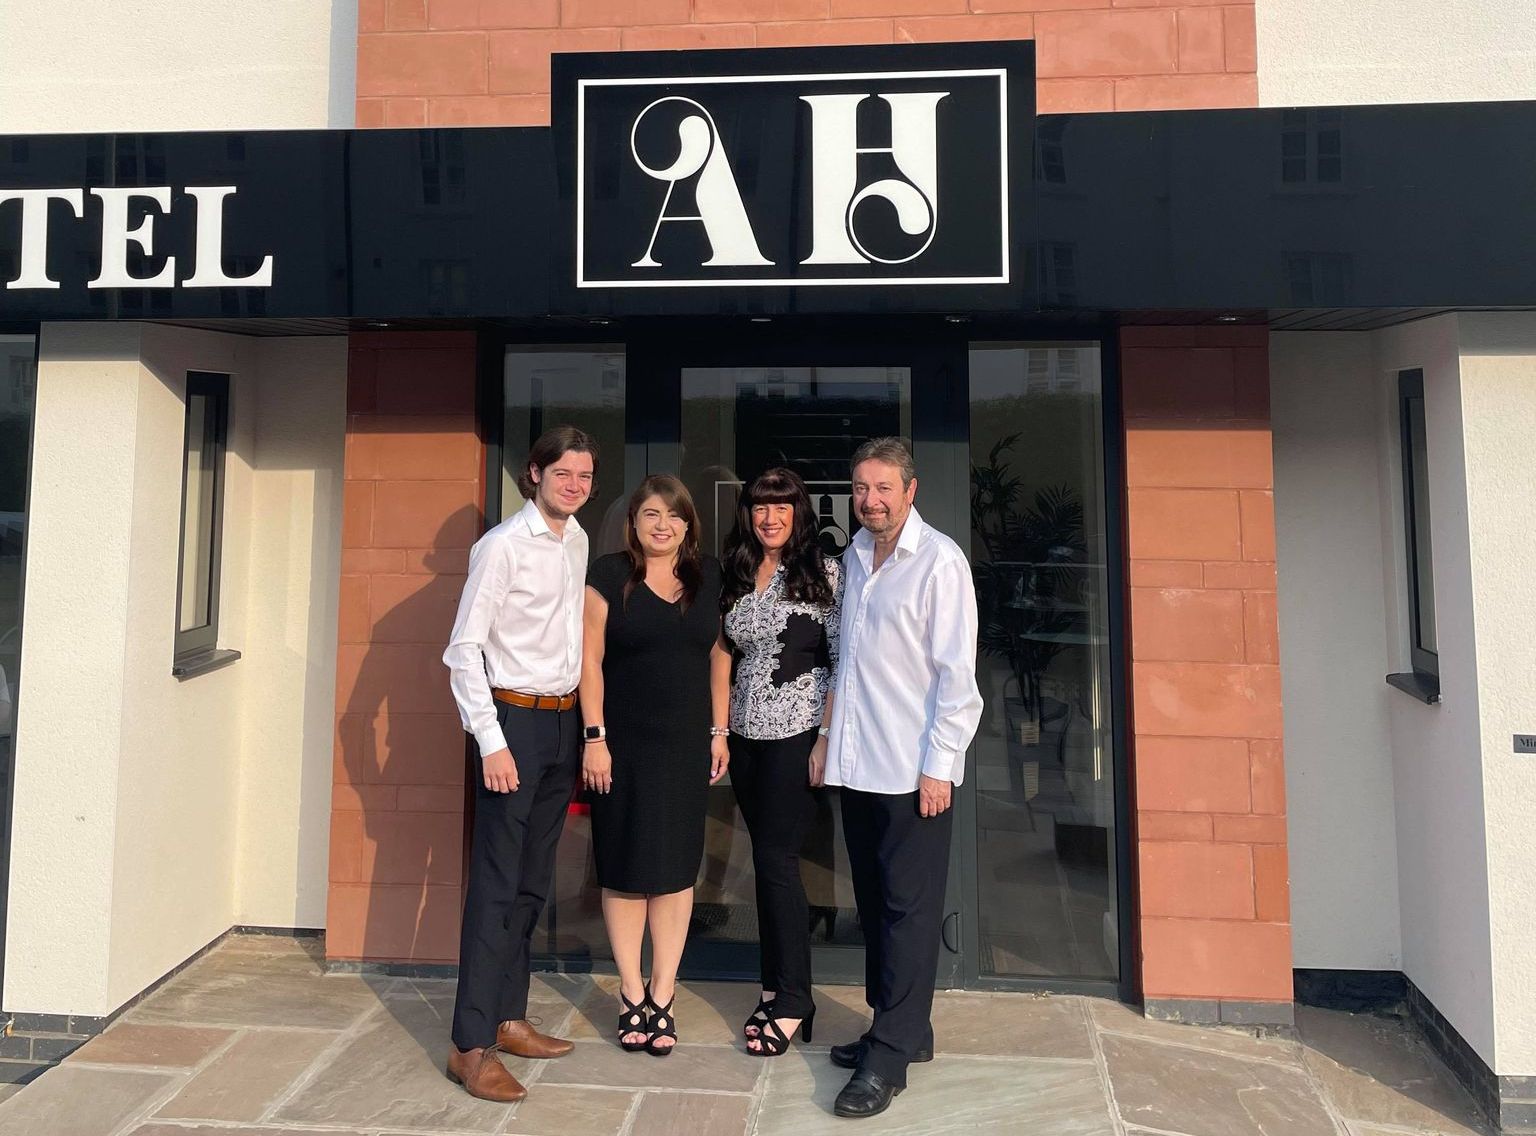 Anelli Hotel & Amici Bar has opened at 1-3 Avondale Road in Southport town centre. The hotel is run by the Anelli family: Roberto and Karen with children Adriana and Fabrizio